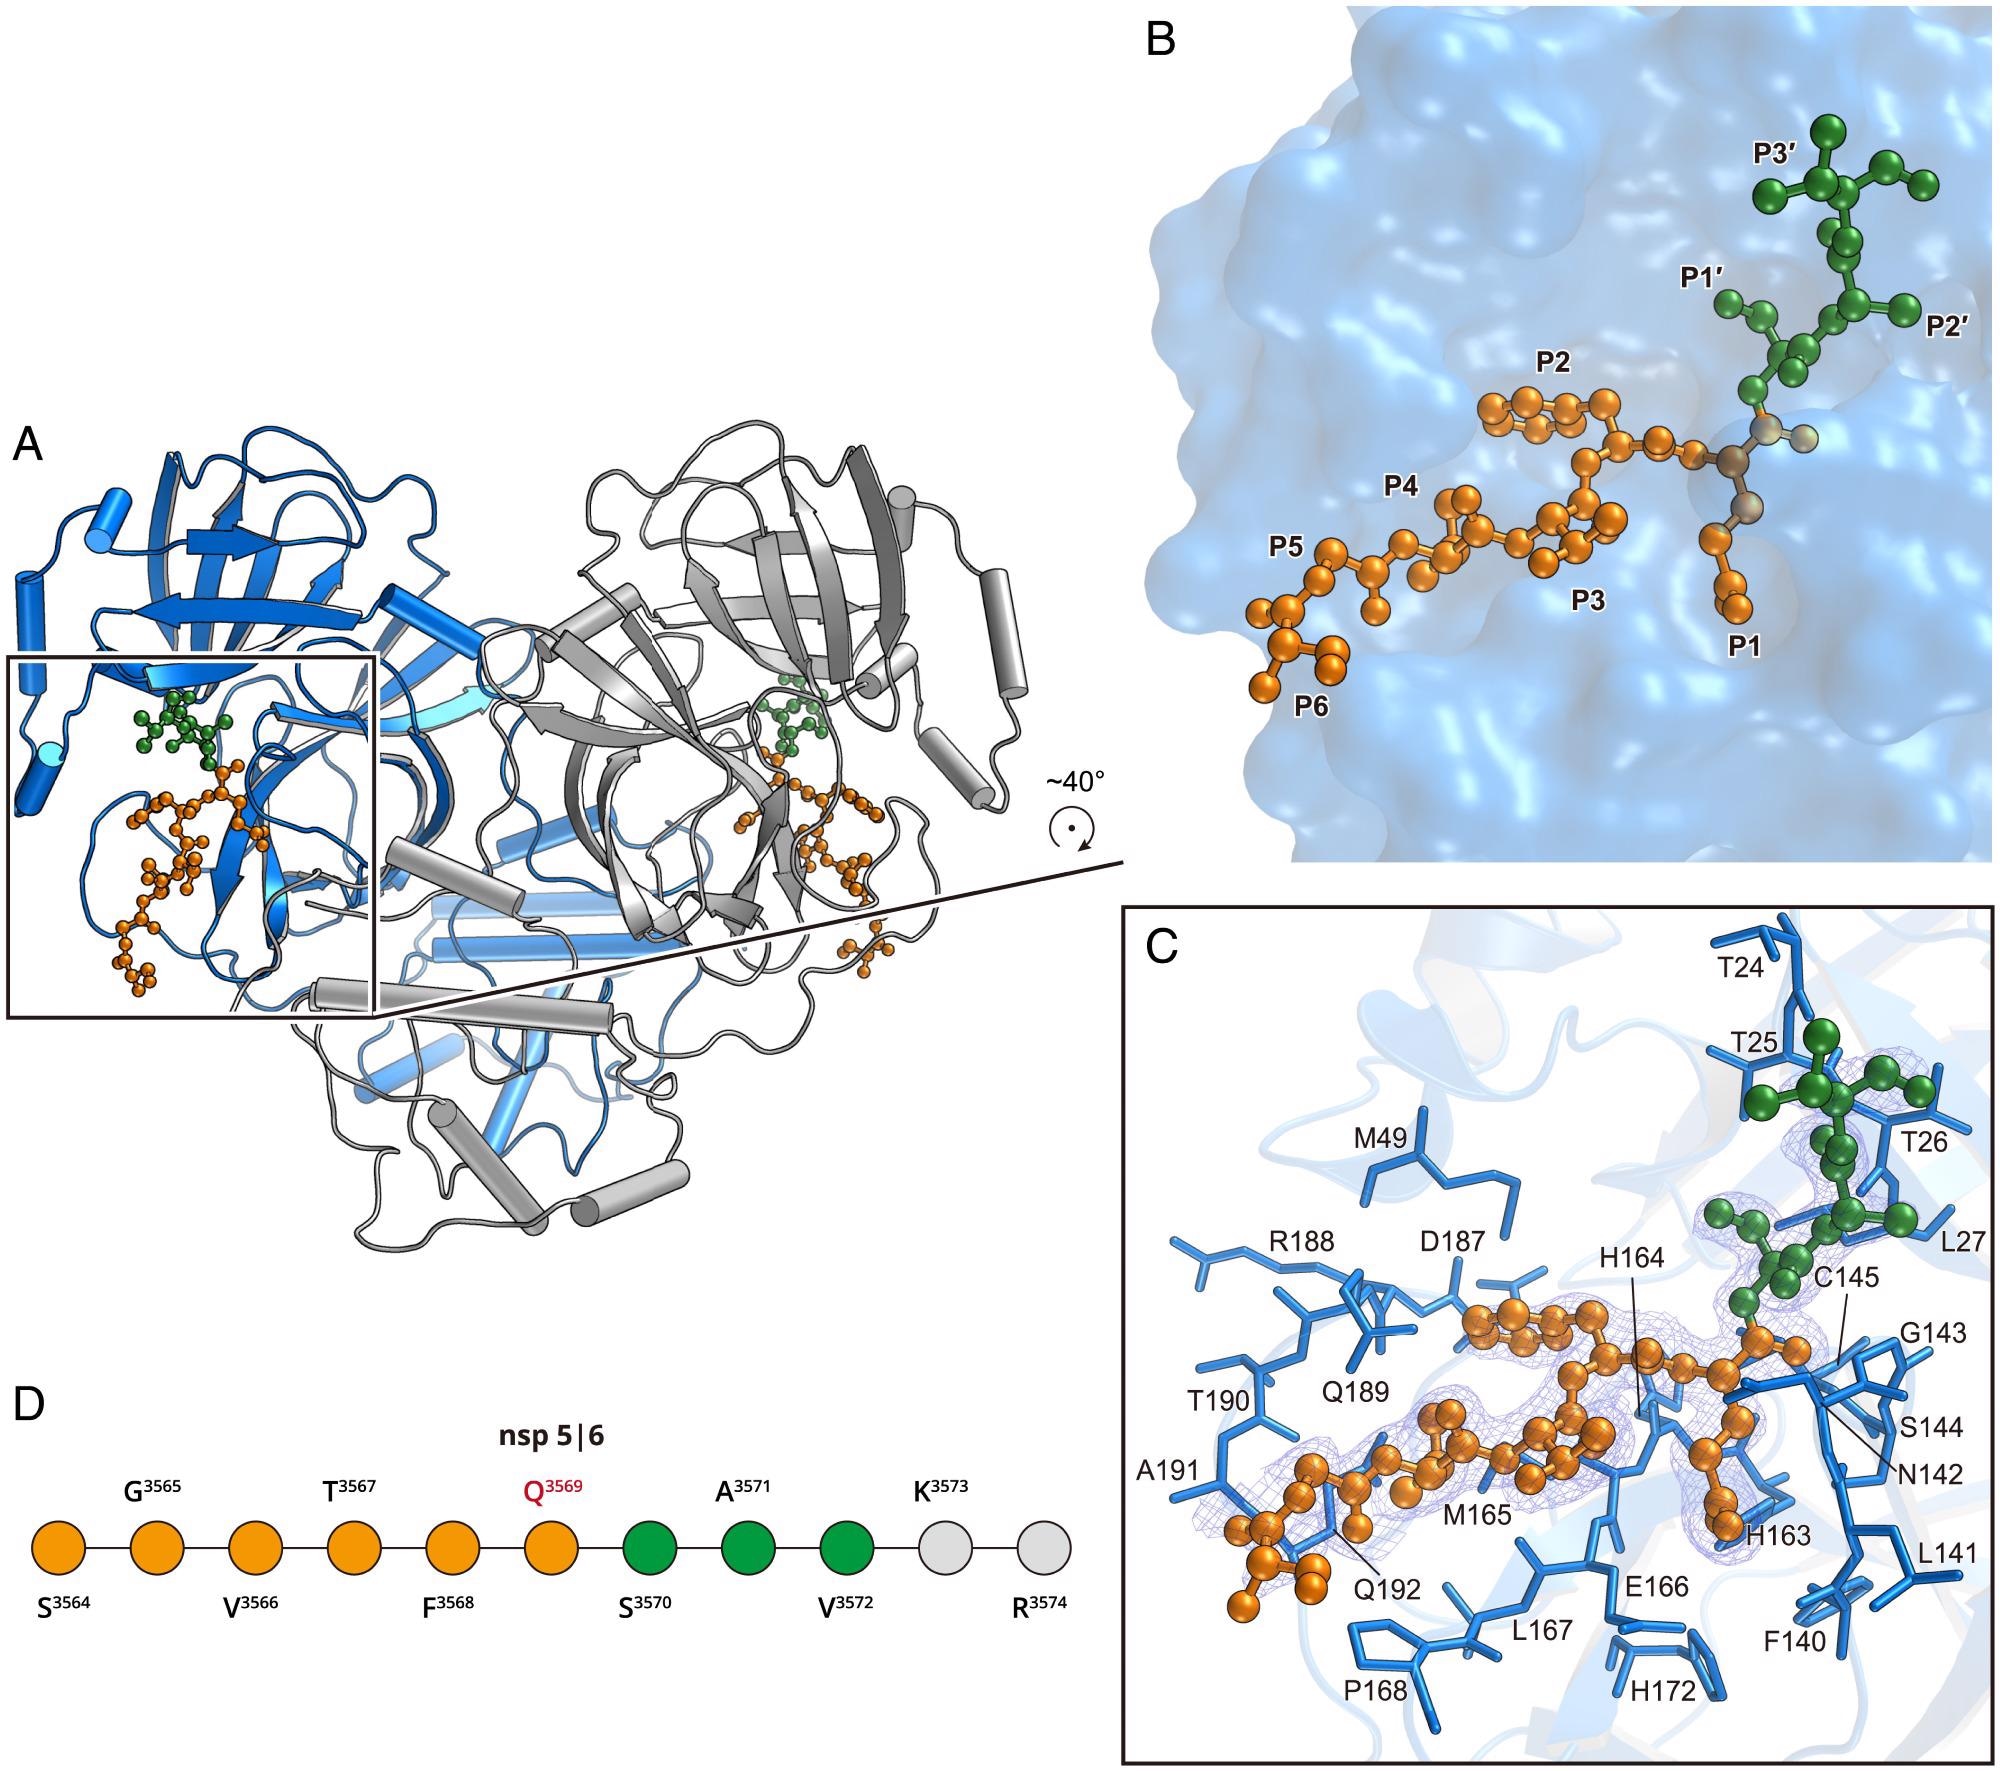 Structure of the H41A mutant in complex with the nsp5|6 peptidyl substrate. (A) The overall structure of H41A–nsp5|6 in dimer form. Protomer A and protomer B are colored blue and gray, respectively. (B) The zoom-in view of the substrate-binding pocket. The nsp5|6 peptidyl substrate is shown as a ball-and-stick model. Residues from P1 to P6 and P1′ to P3′ are colored in orange and green, respectively. (C) The detailed interaction between Mpro and its cleavage substrate. Residues involved in the substrate binding are shown as marine sticks. The polder map colored as blue mesh is contoured at 2.5σ. (D) The schematic diagram of nsp5|6. Residues that can be traced according to the electron density map are colored in orange or green. Residues that cannot be traced are in gray.